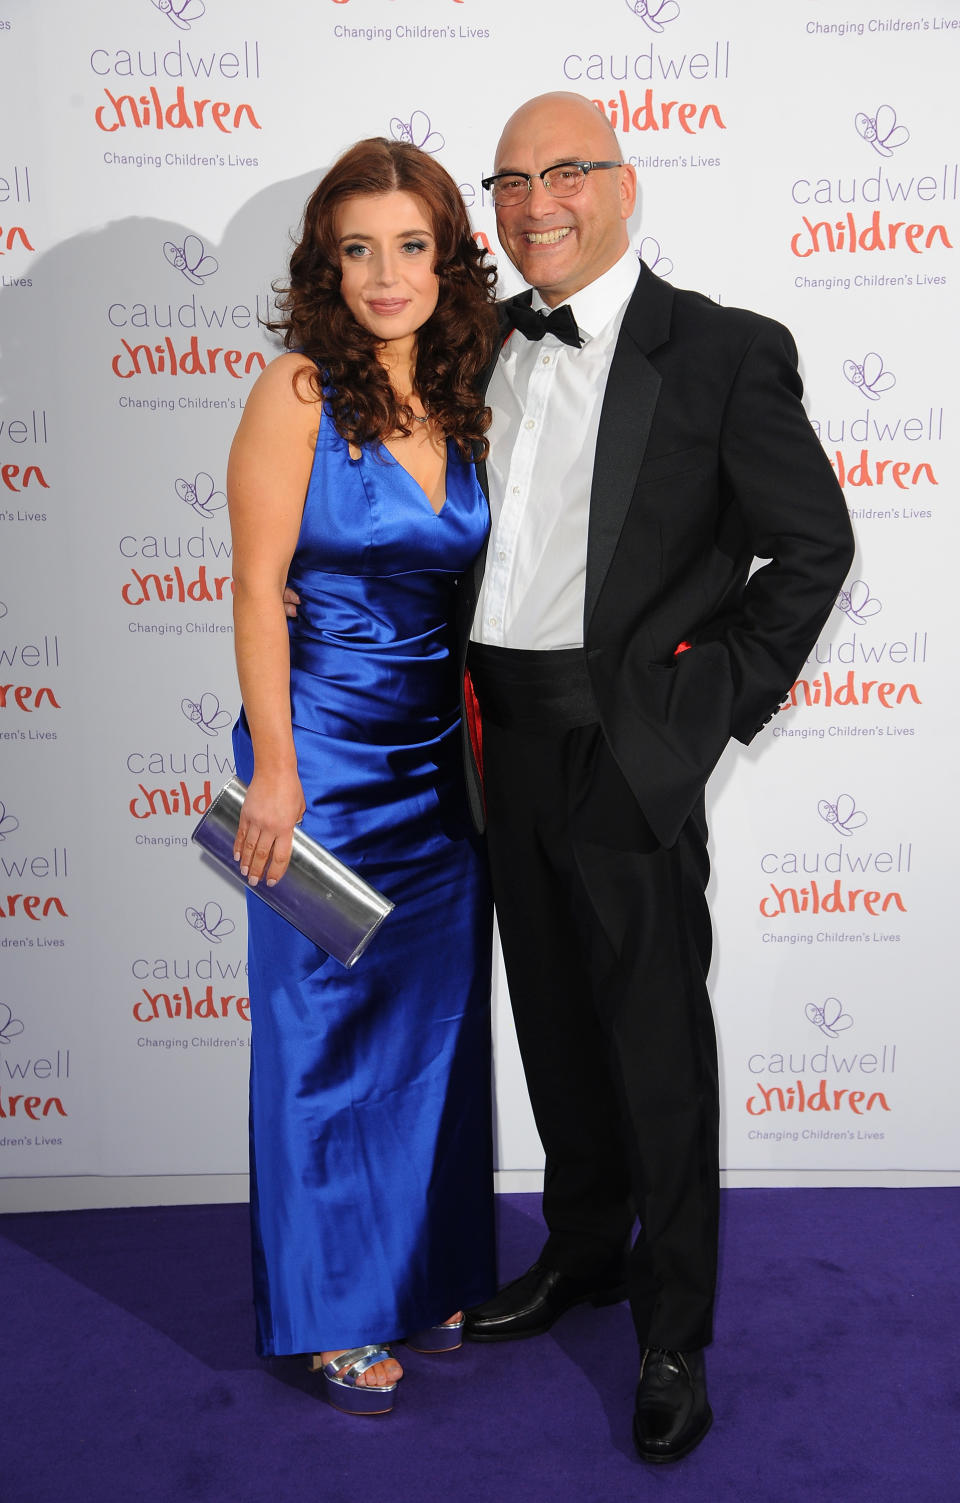 LONDON, ENGLAND - MAY 15:  Gregg Wallace attends the Caudwell Children Butterfly Ball at The Grosvenor House Hotel on May 15, 2014 in London, England.  (Photo by Eamonn McCormack/WireImage)